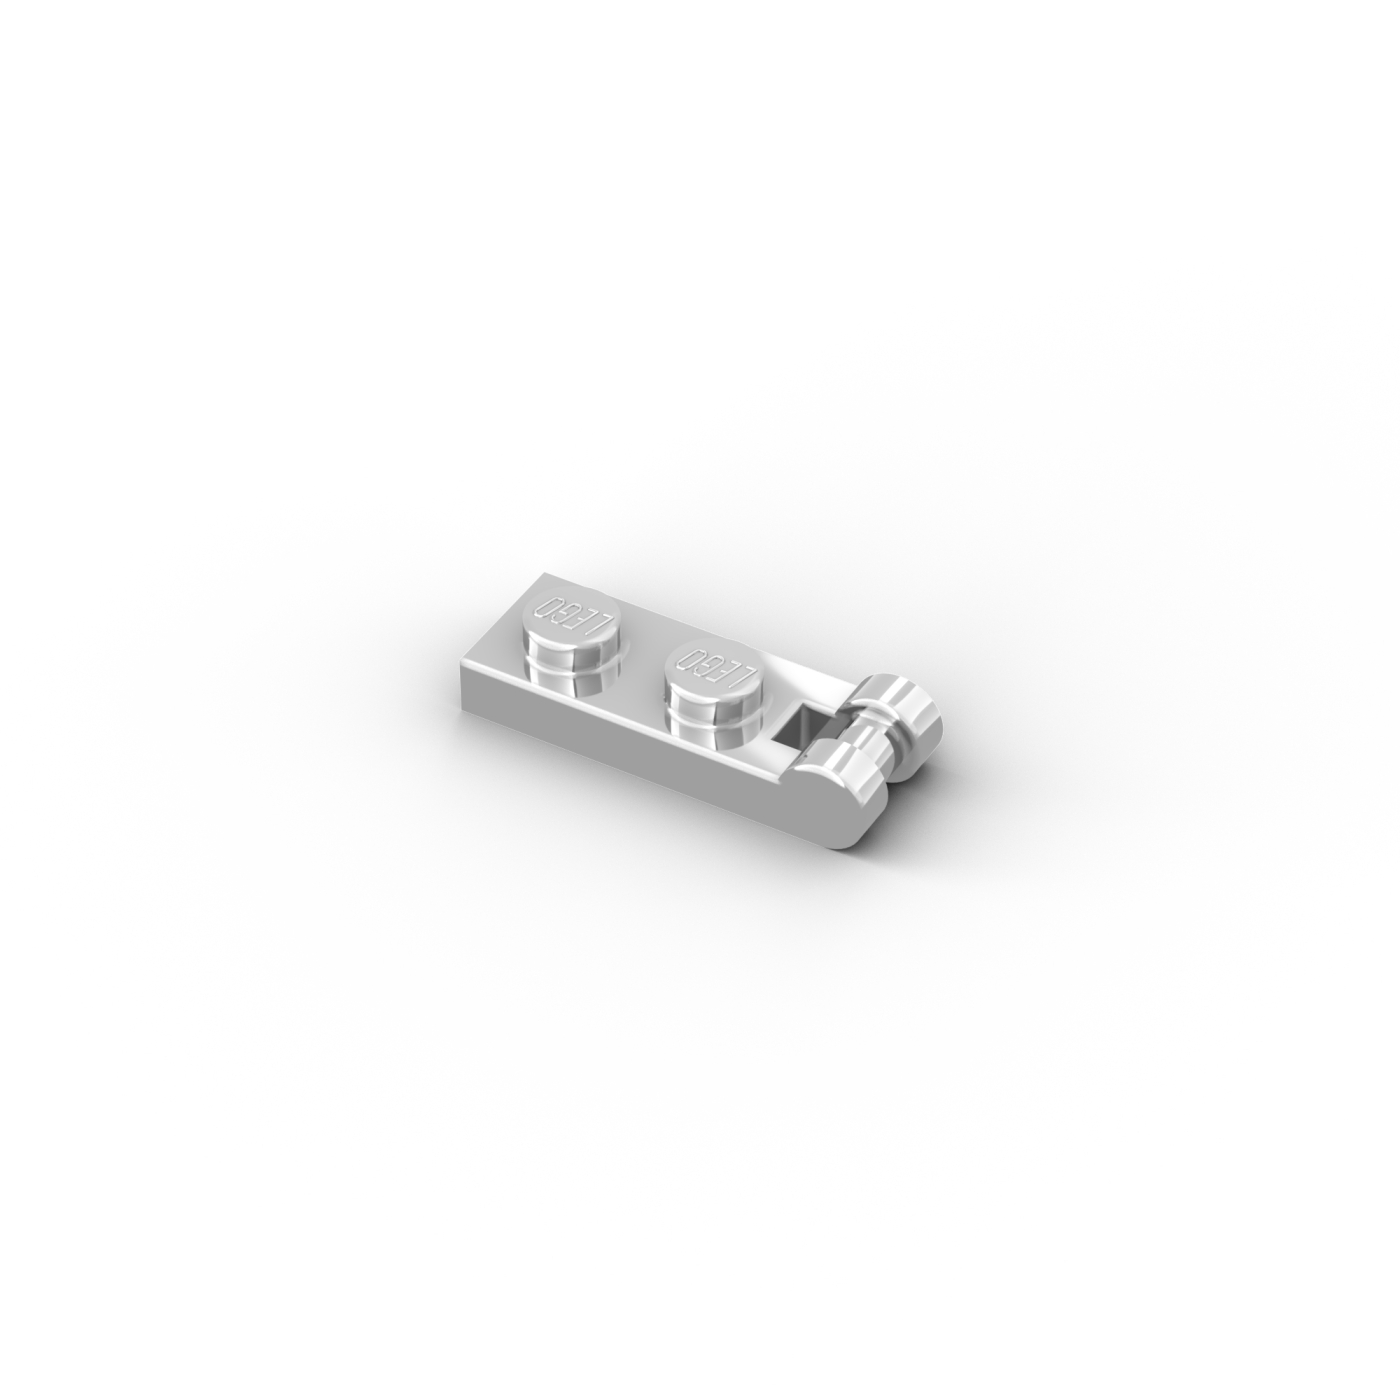 1x2 LEGO® plate modified with handle on end - closed ends